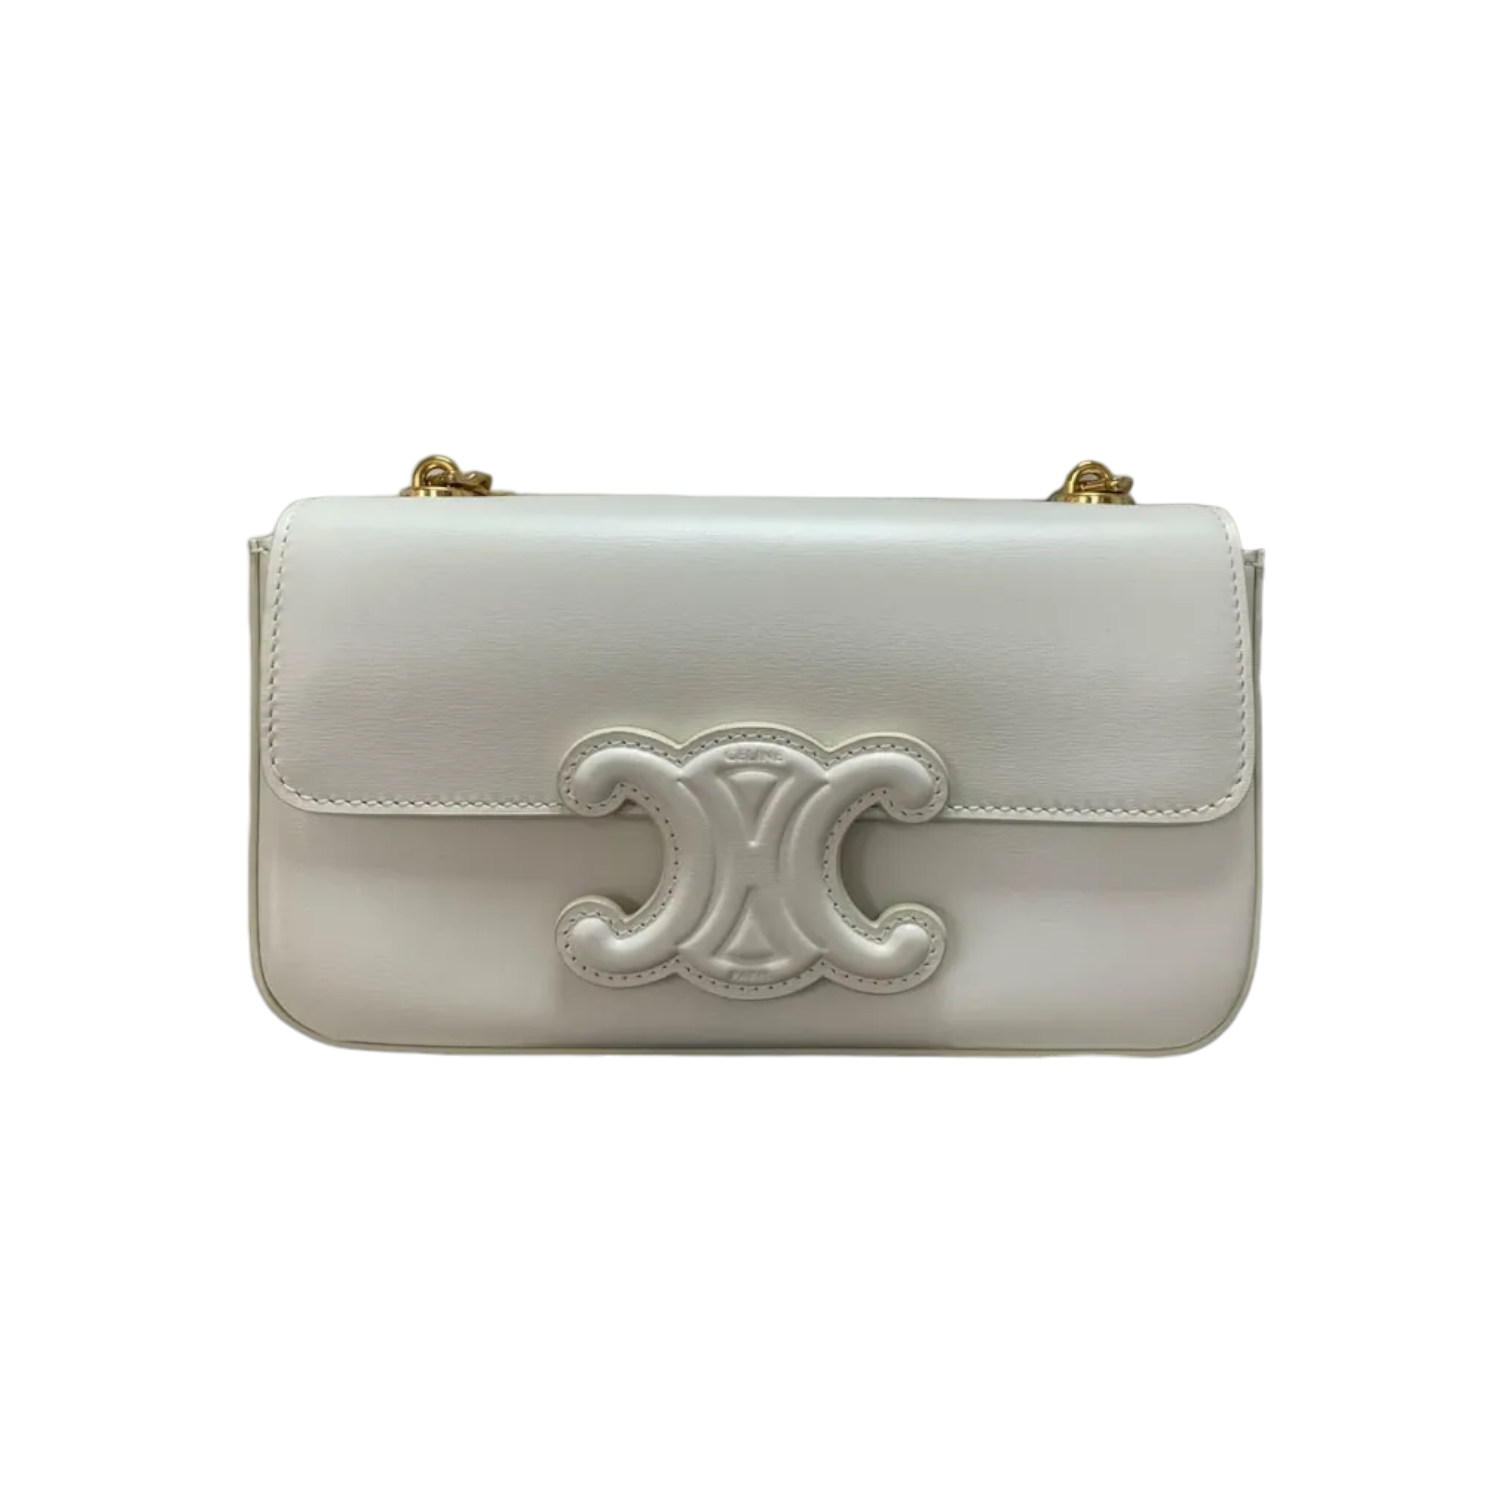 Celine - Mini Vanity Case Cuir Triomphe in Smooth Calfskin Leather - Beige / Yellow - for Women